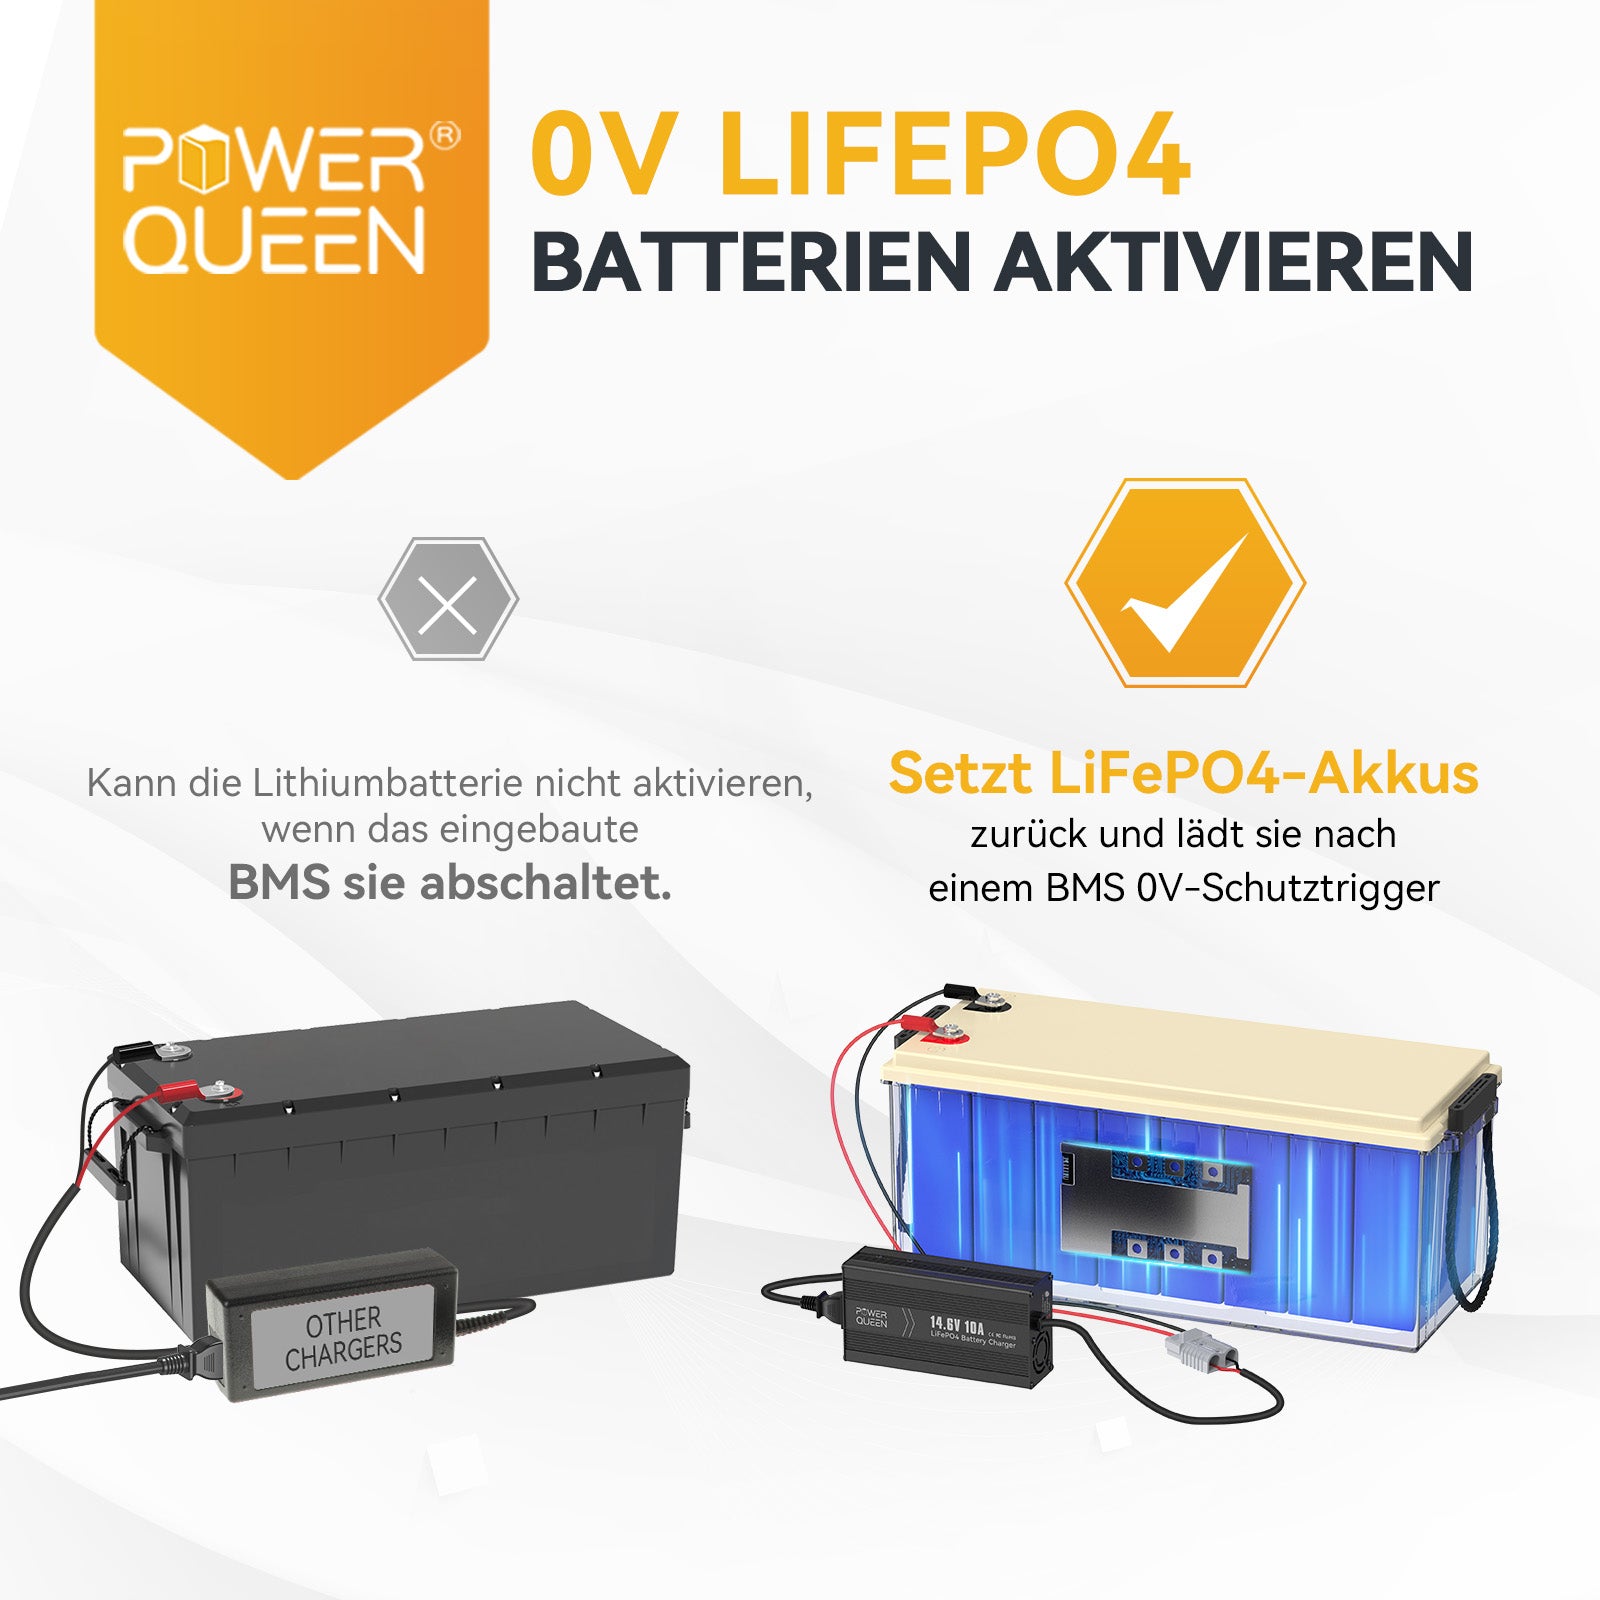 Power Queen 14.6V 10A LiFePO4 charger for 12V LiFePO4 battery